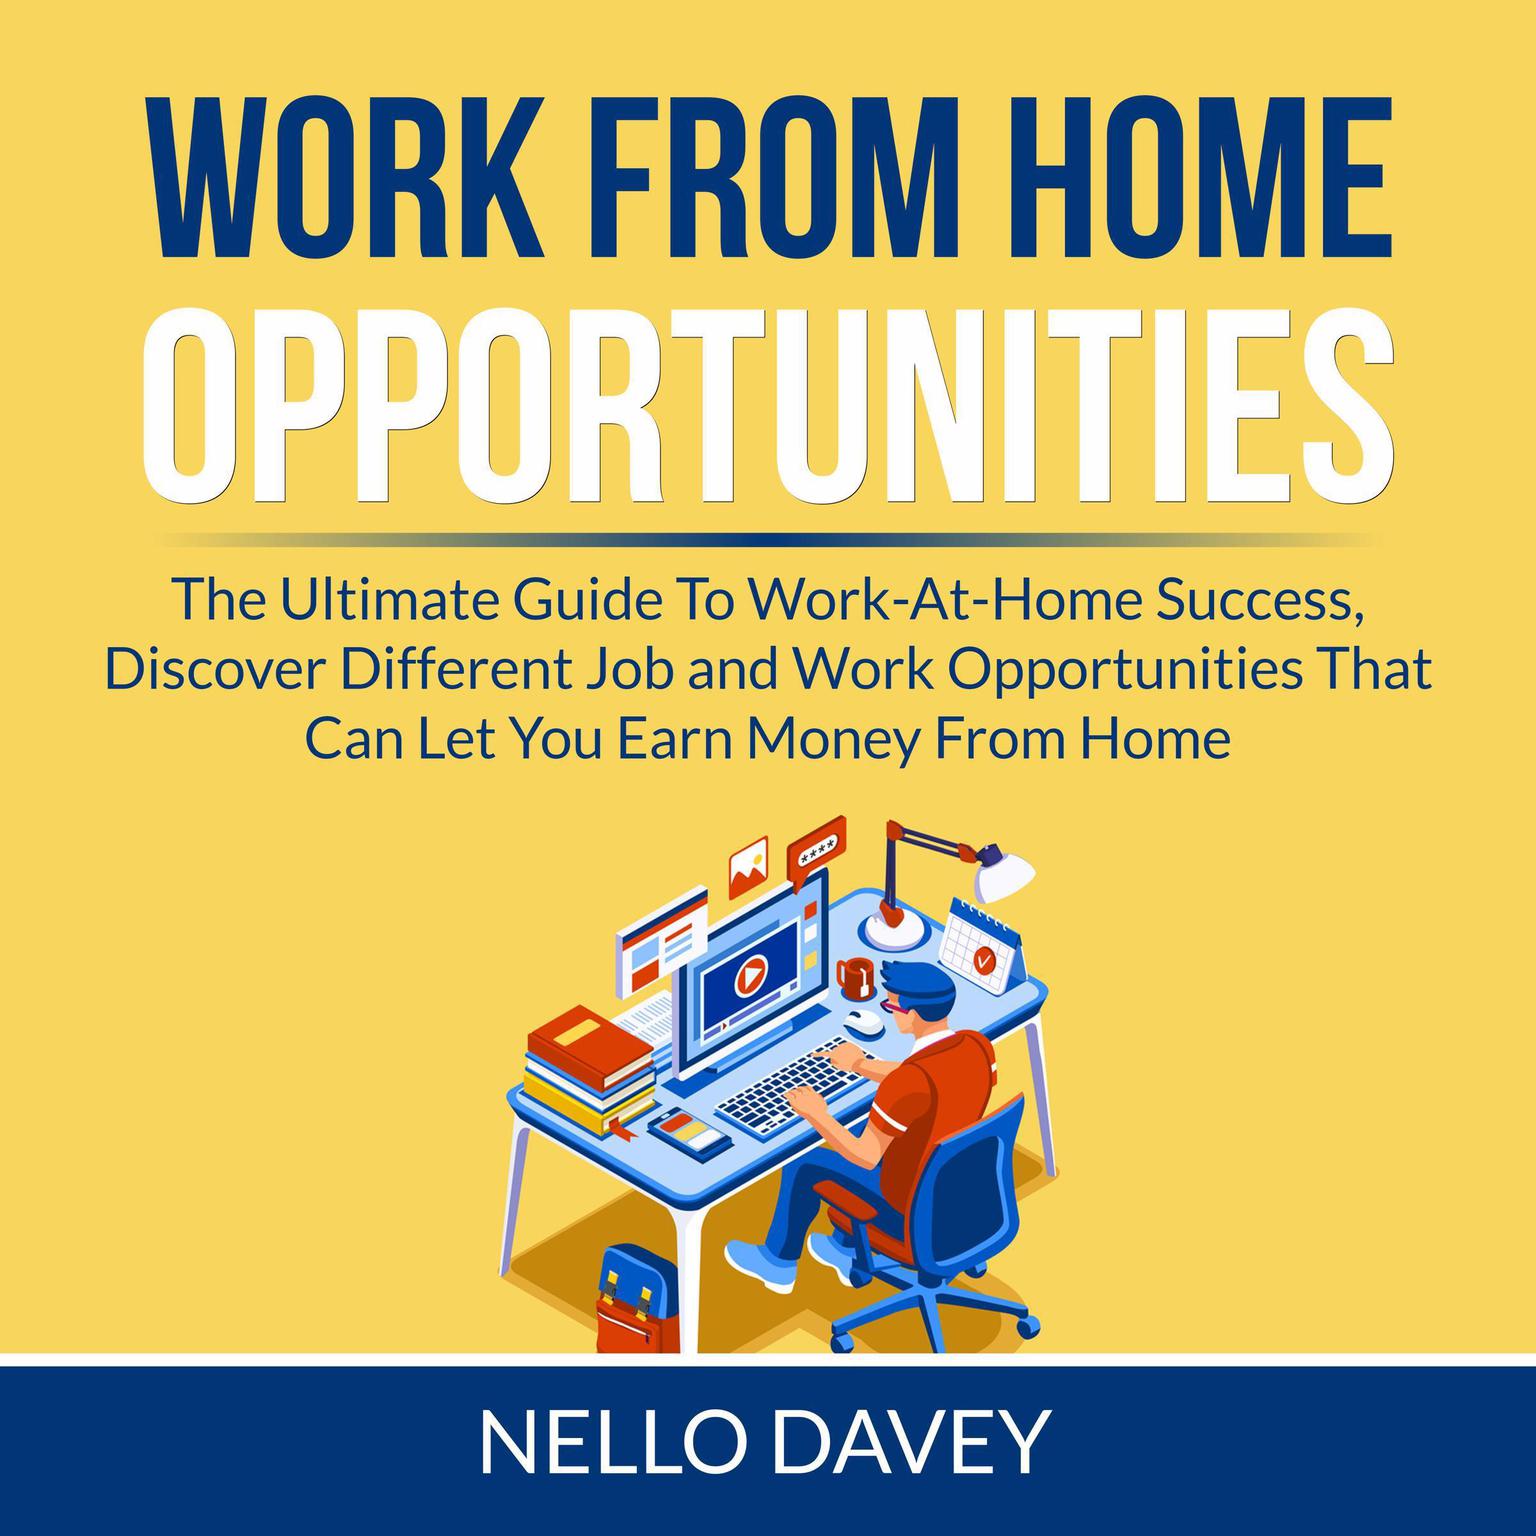 Work From Home Opportunities: The Ultimate Guide To Work-At-Home Success, Discover Different Job and Work Opportunities That Can Let You Earn Money From Home Audiobook, by Nello Davey